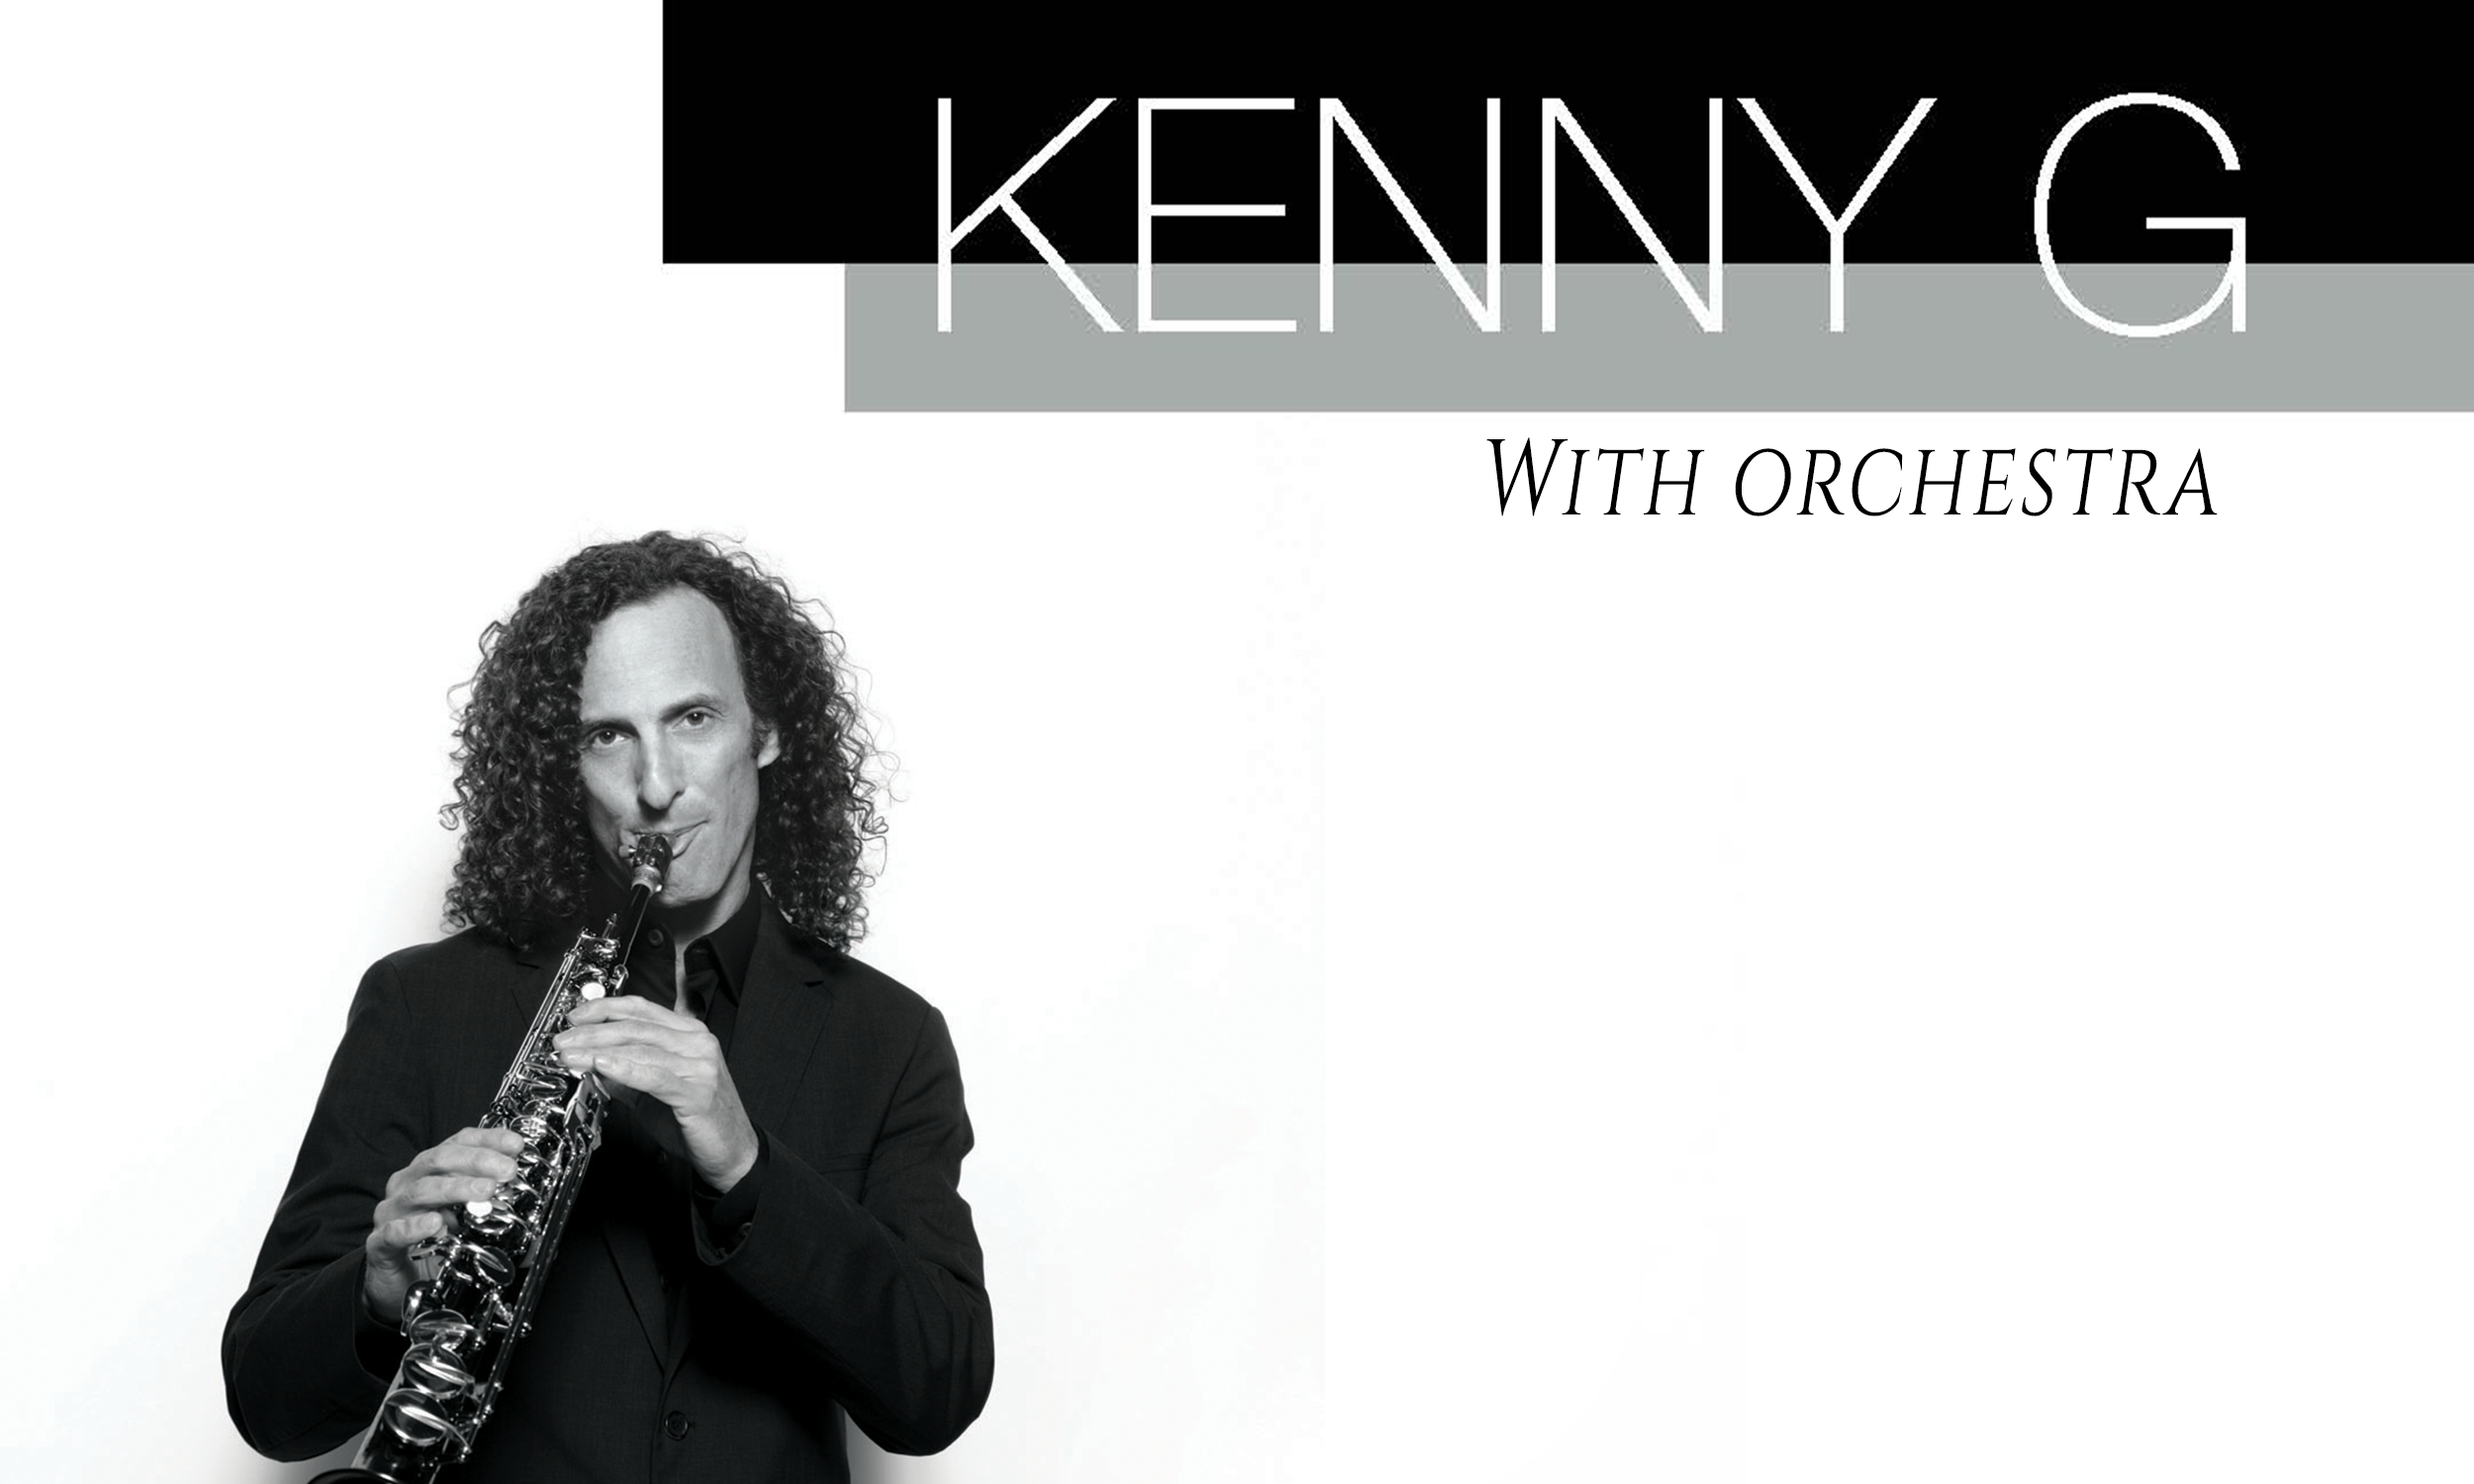 Kenny G with orchestra